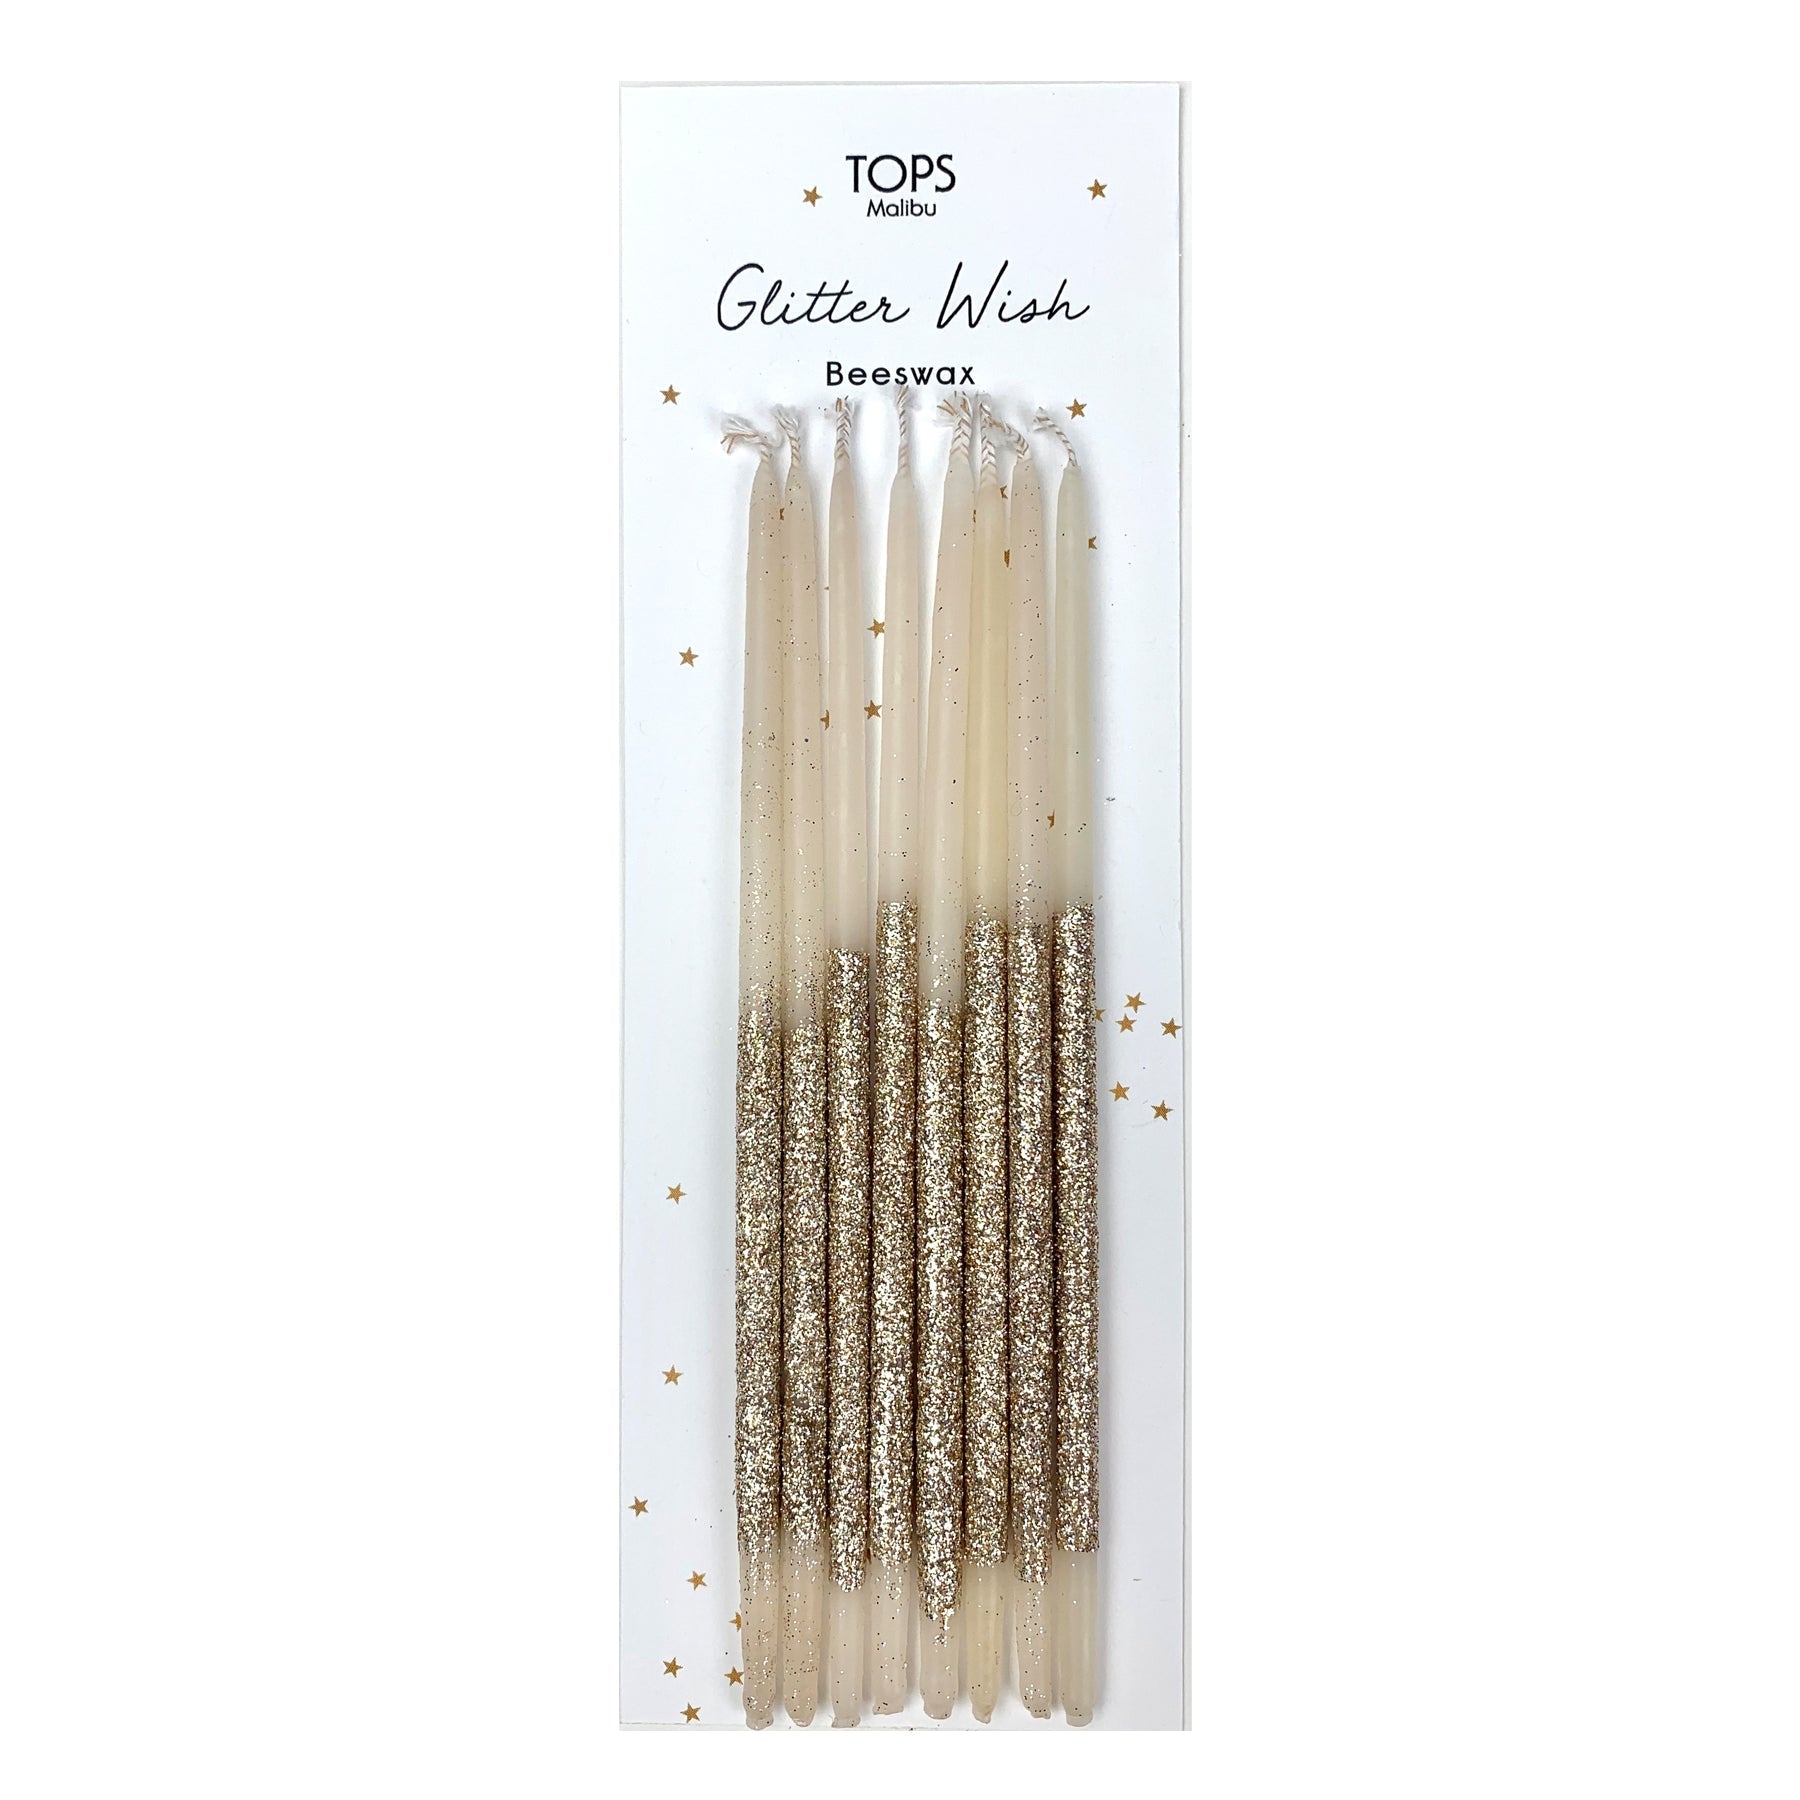 Glitter Wish Beeswax Candles ~ Various Colors and Sizes